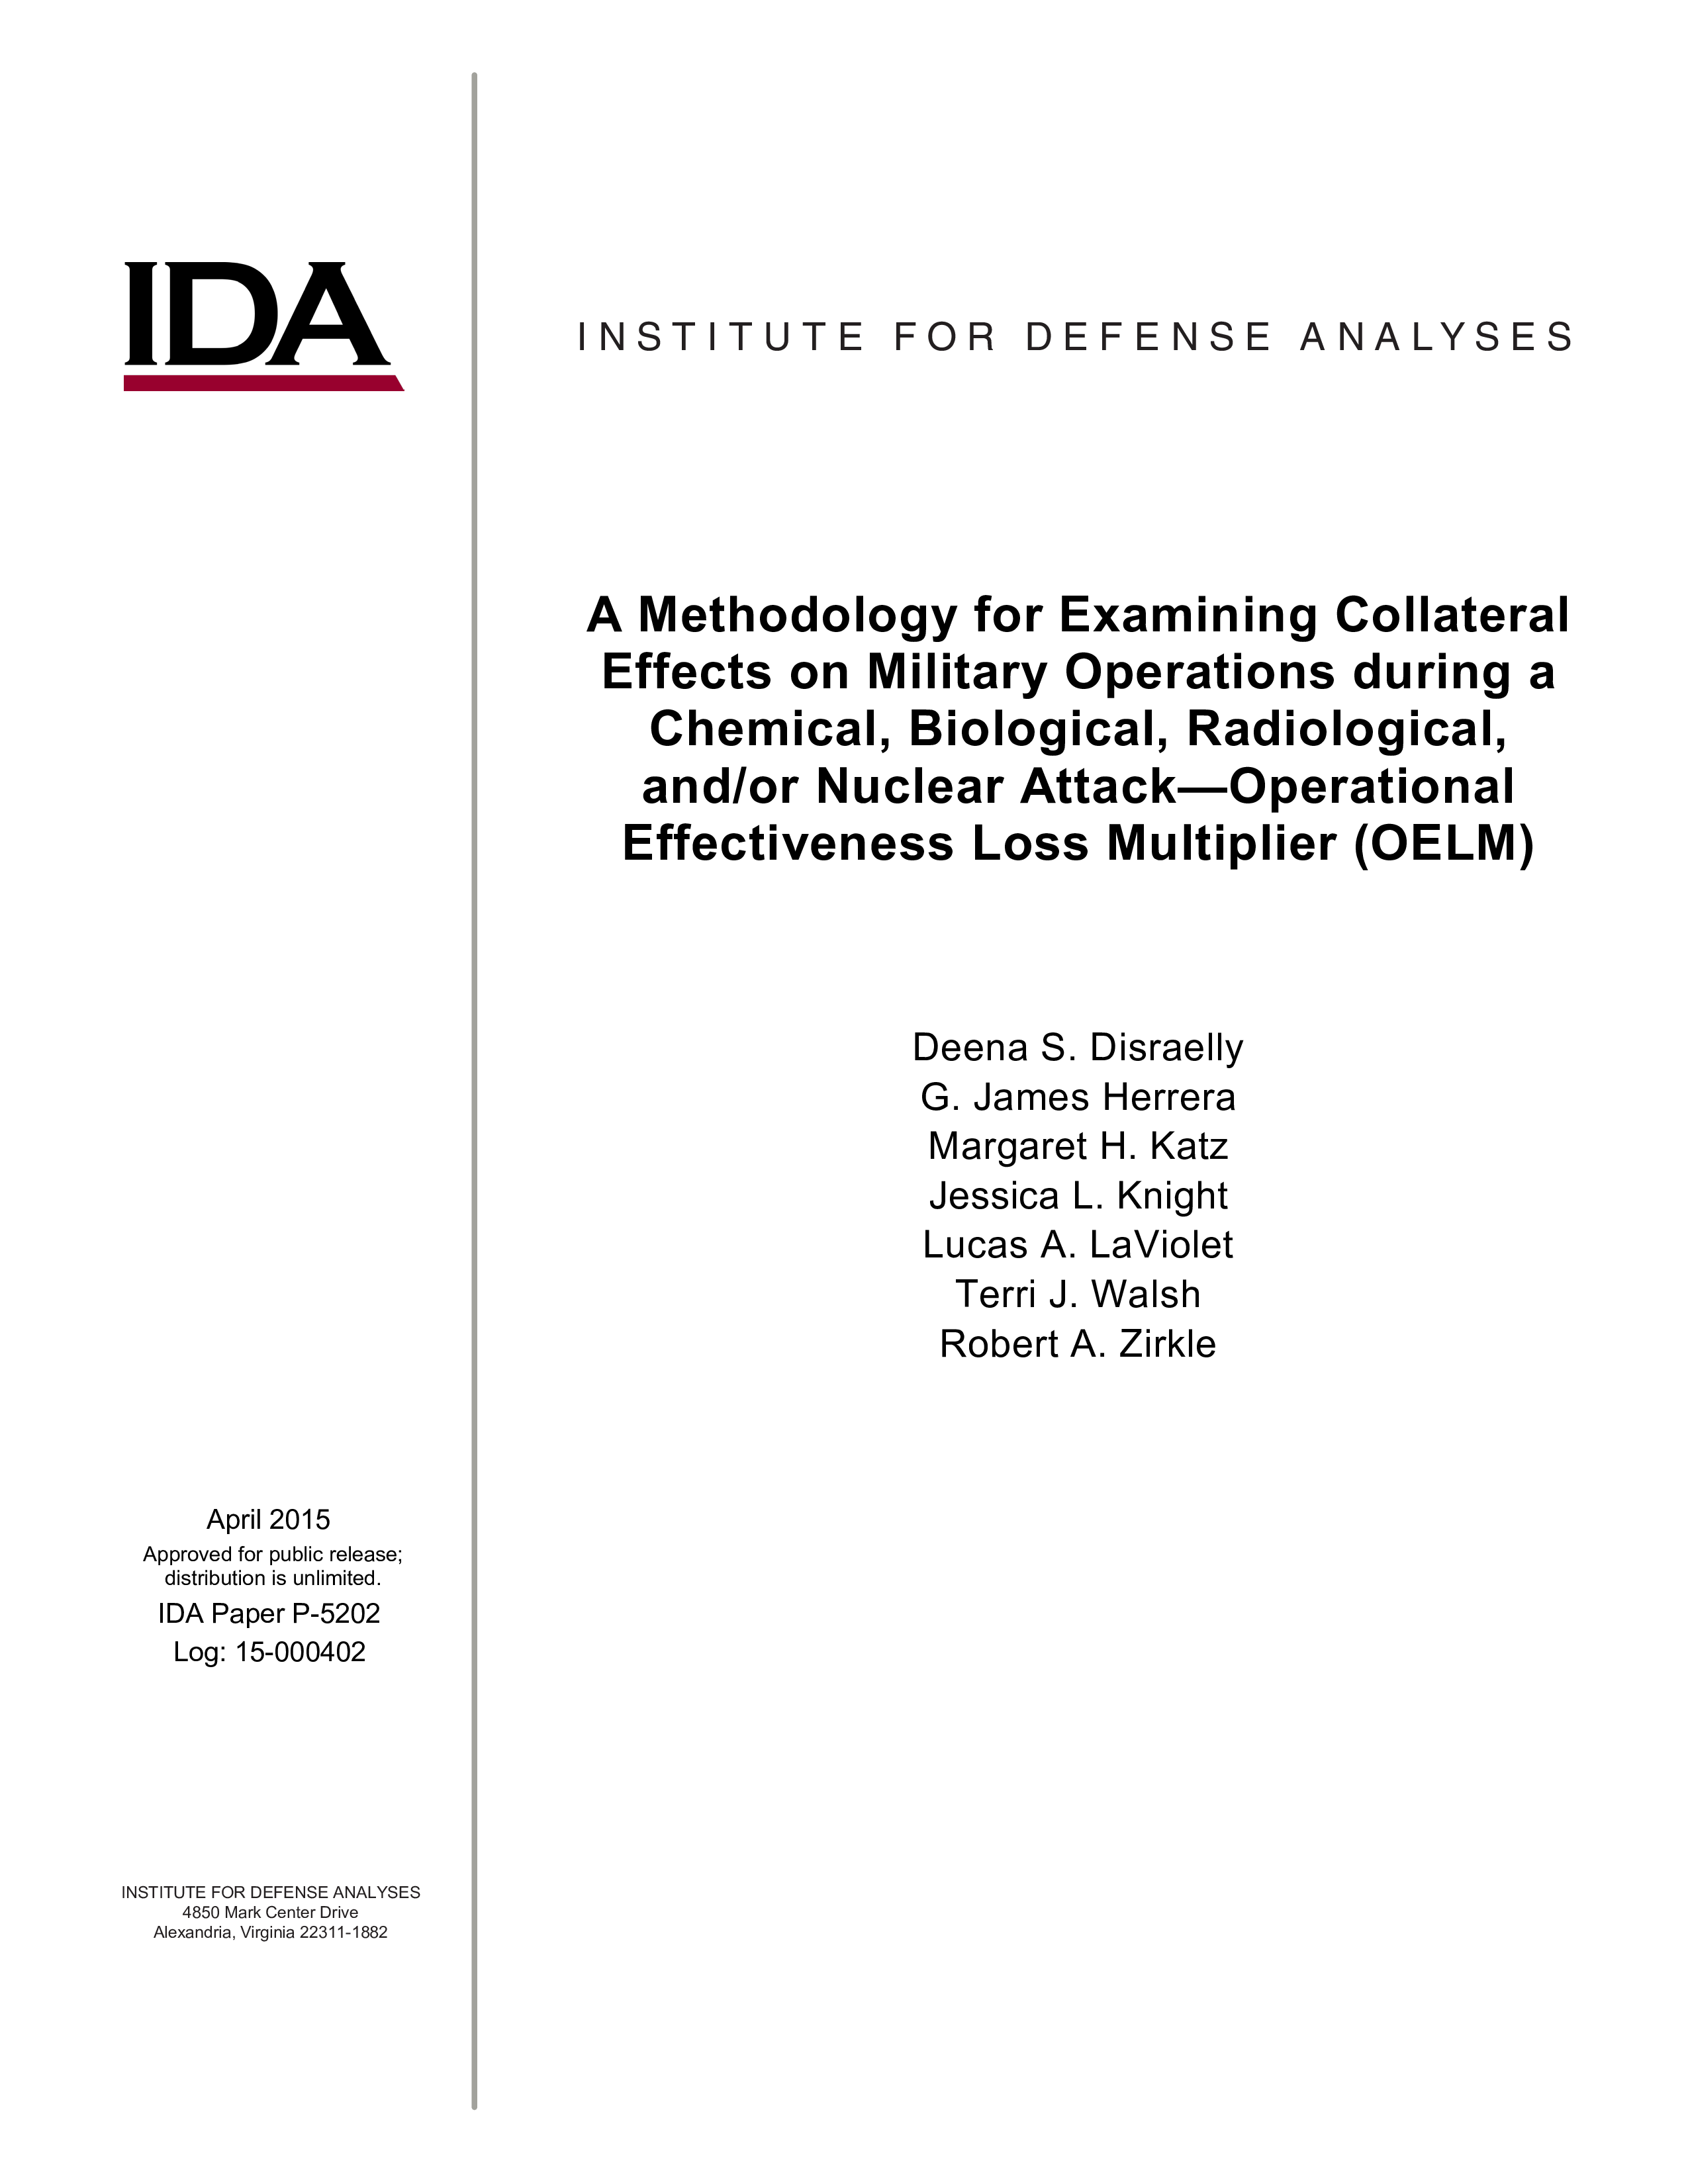 A Methodology for Examining Collateral Effects on Military Operations during a Chemical Biological R